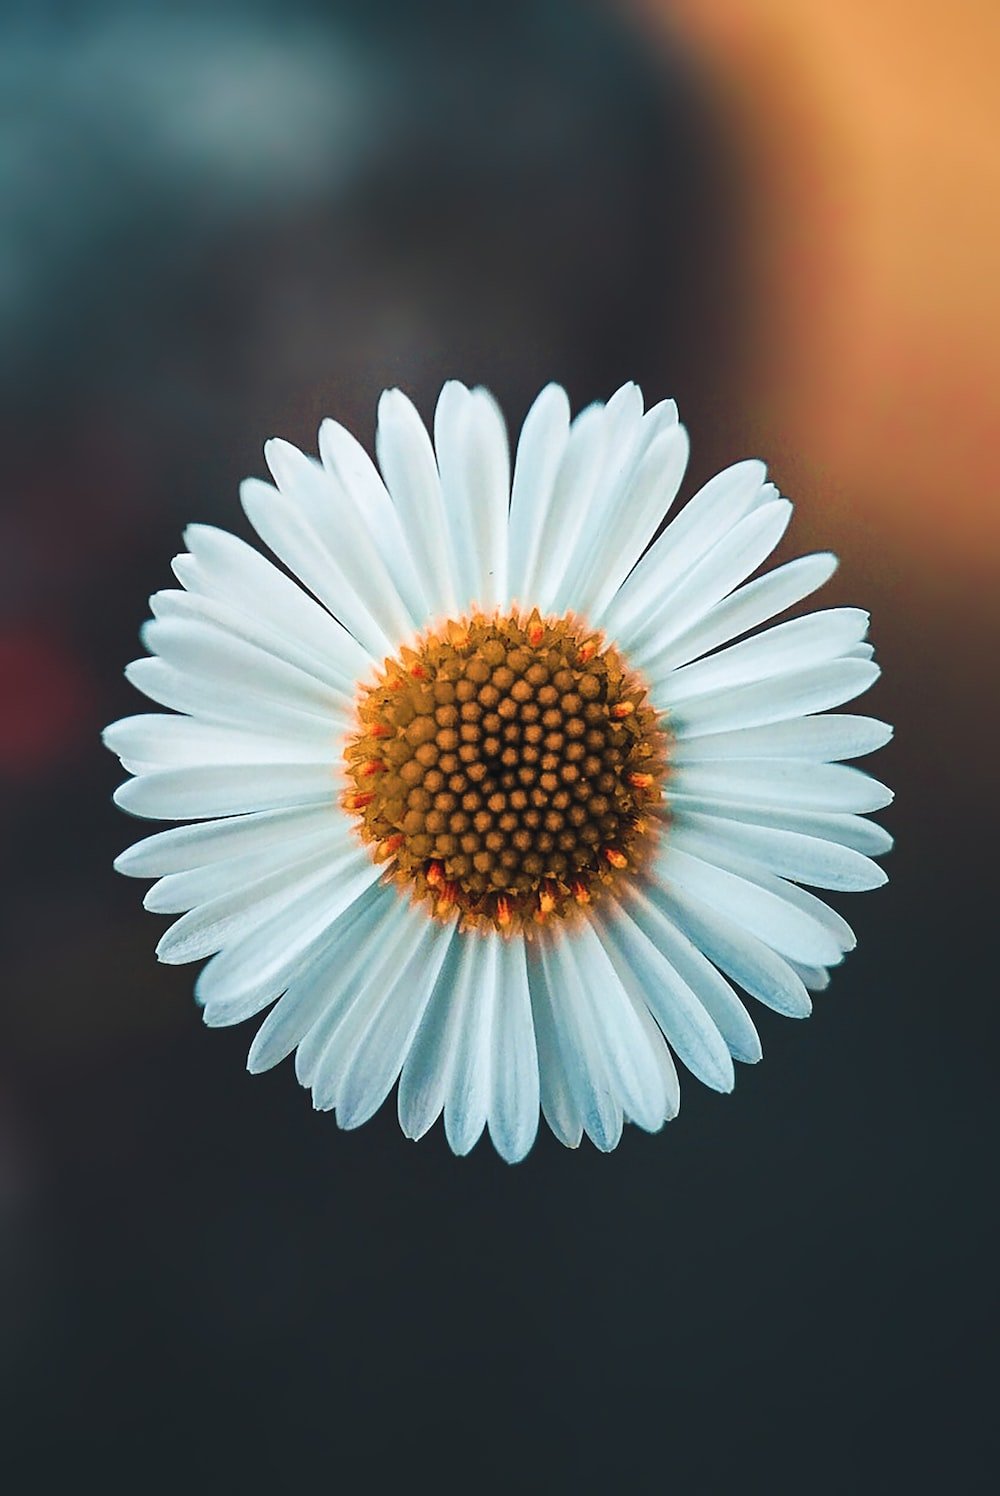 Daisy Flower Picture. Download Free Image